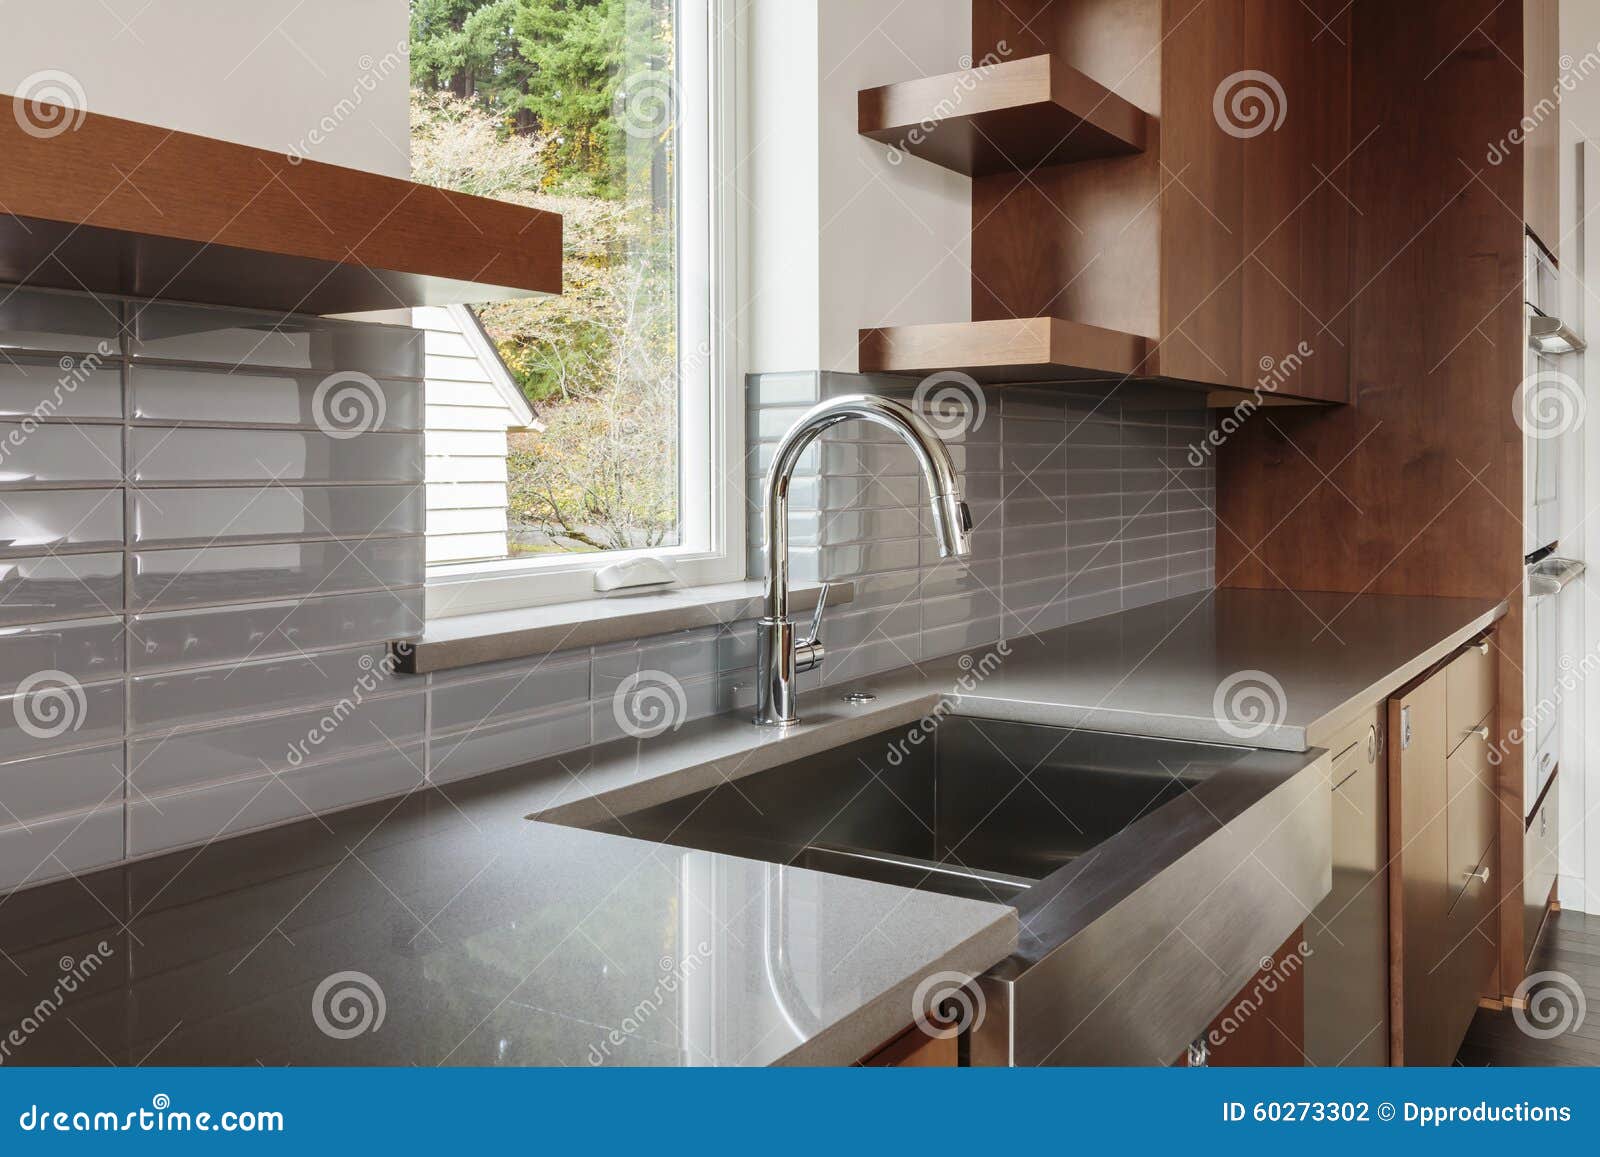 side view of a kitchen sink